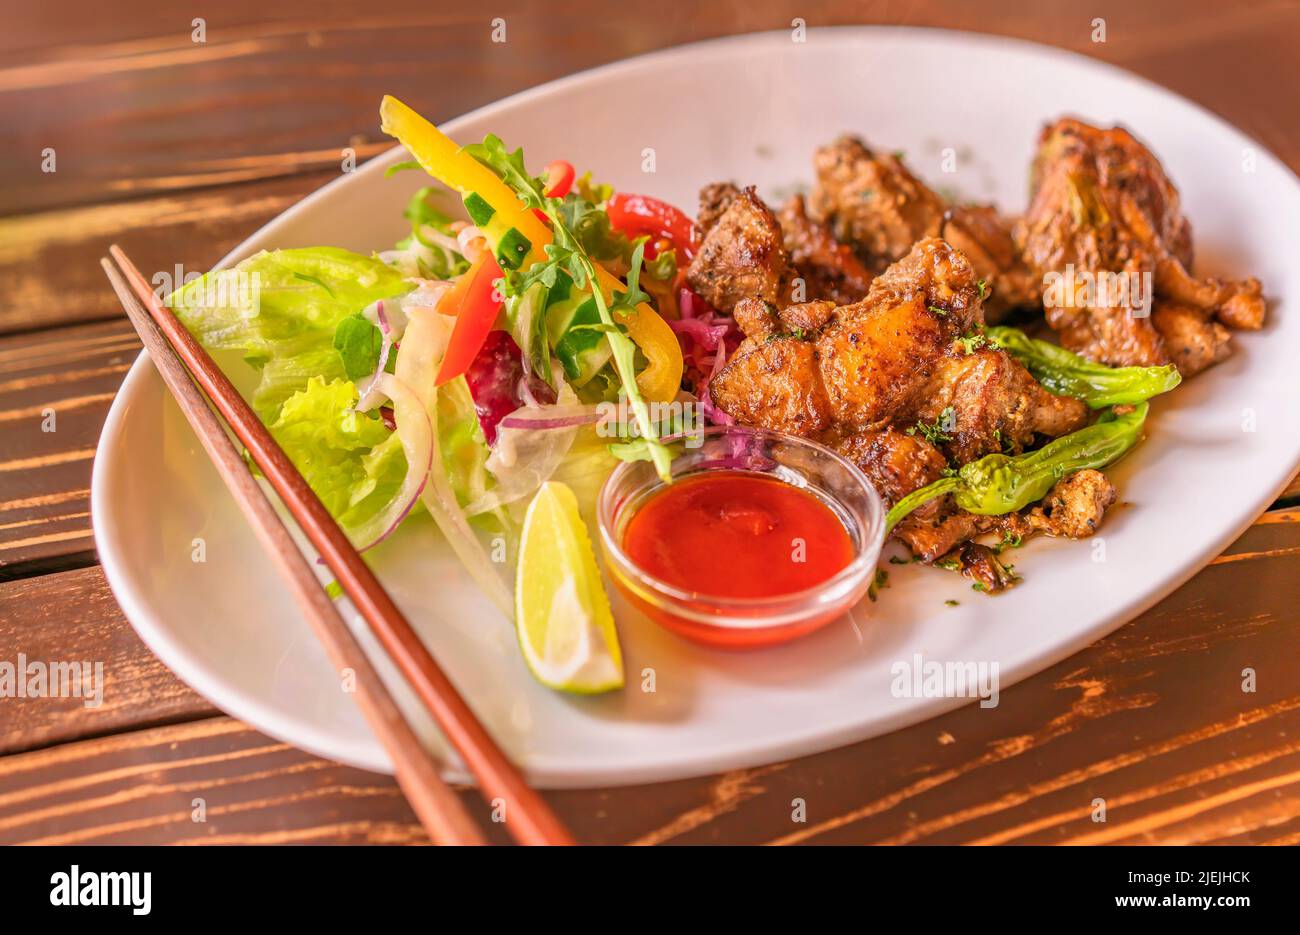 Jamaican jerk chicken plate with vegetables like salada, slices of yellow and red bell peppers, lemon on a plate with chopsticks in a Japanese restaur Stock Photo